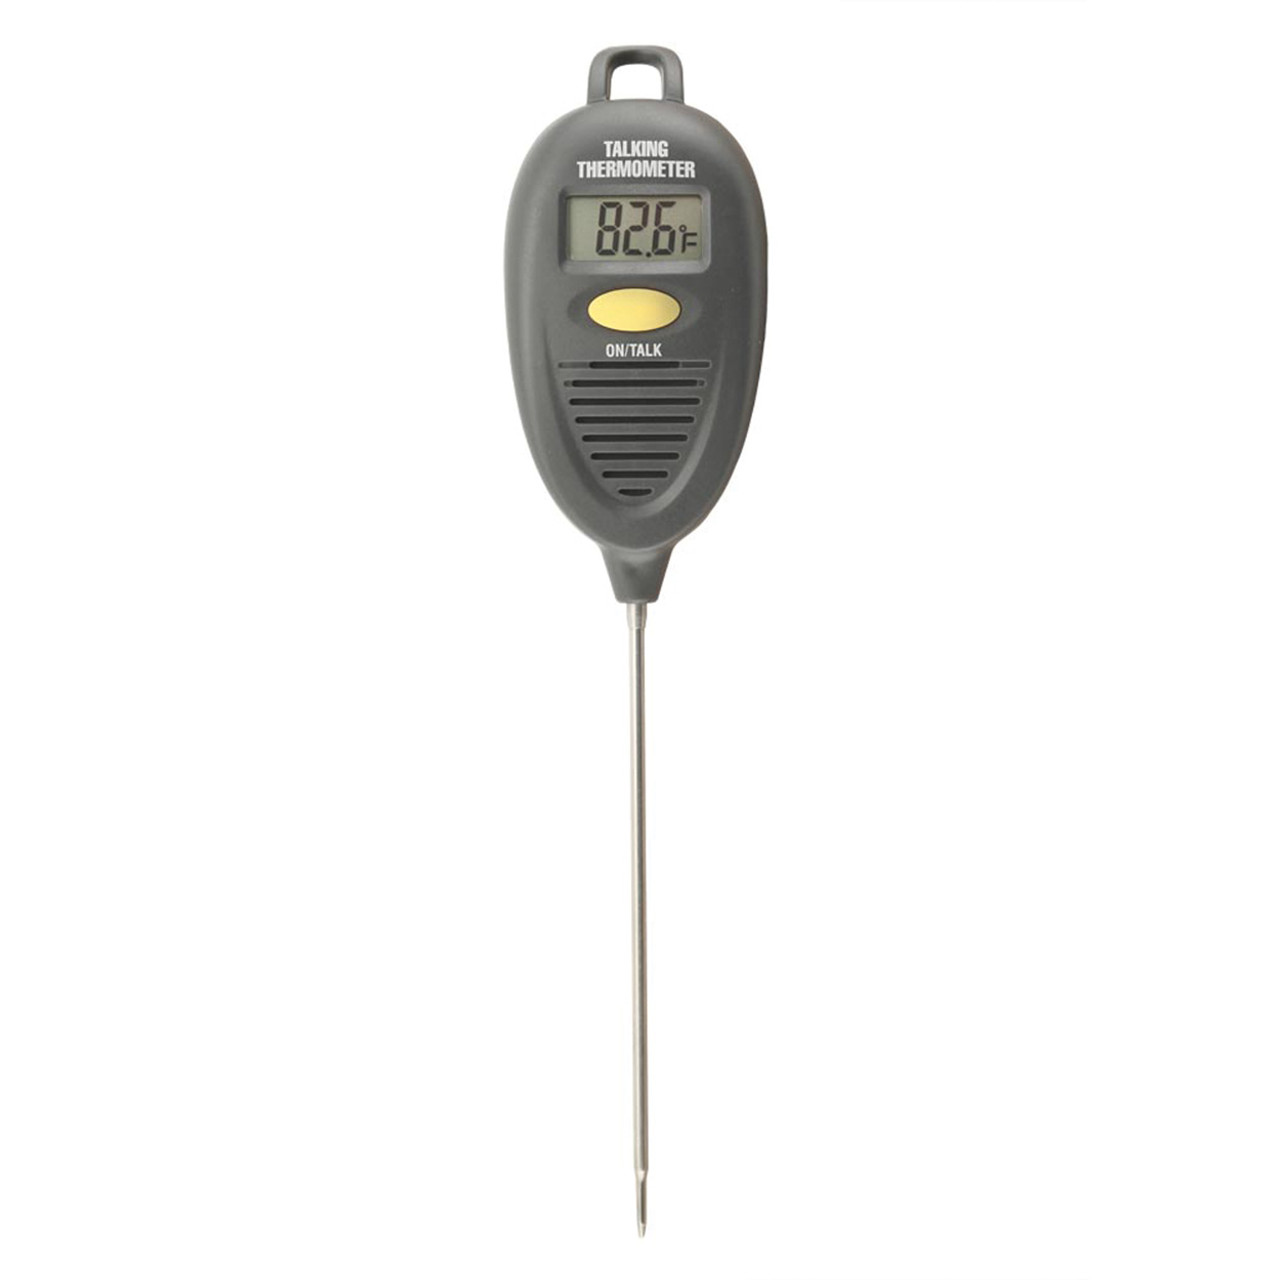 All Purpose Talking Thermometer features a small digital display timer and a yellow off/on button on the front of the device below the LED display. 